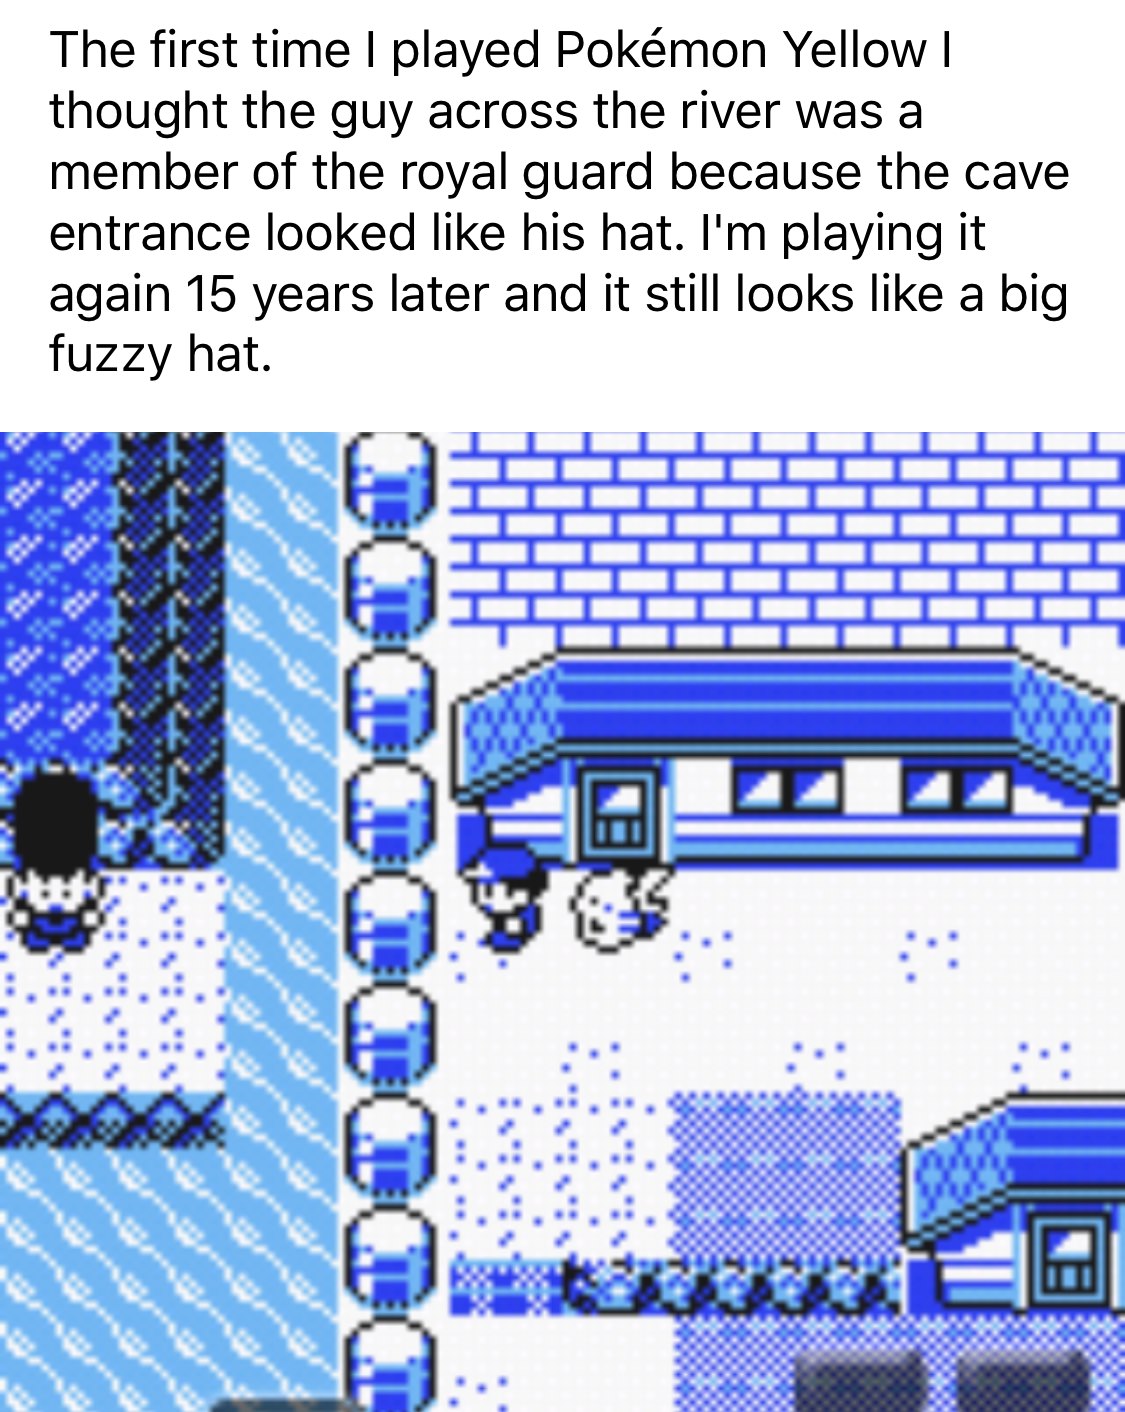 pattern - The first time I played Pokmon Yellow | thought the guy across the river was a member of the royal guard because the cave entrance looked his hat. I'm playing it again 15 years later and it still looks a big fuzzy hat.